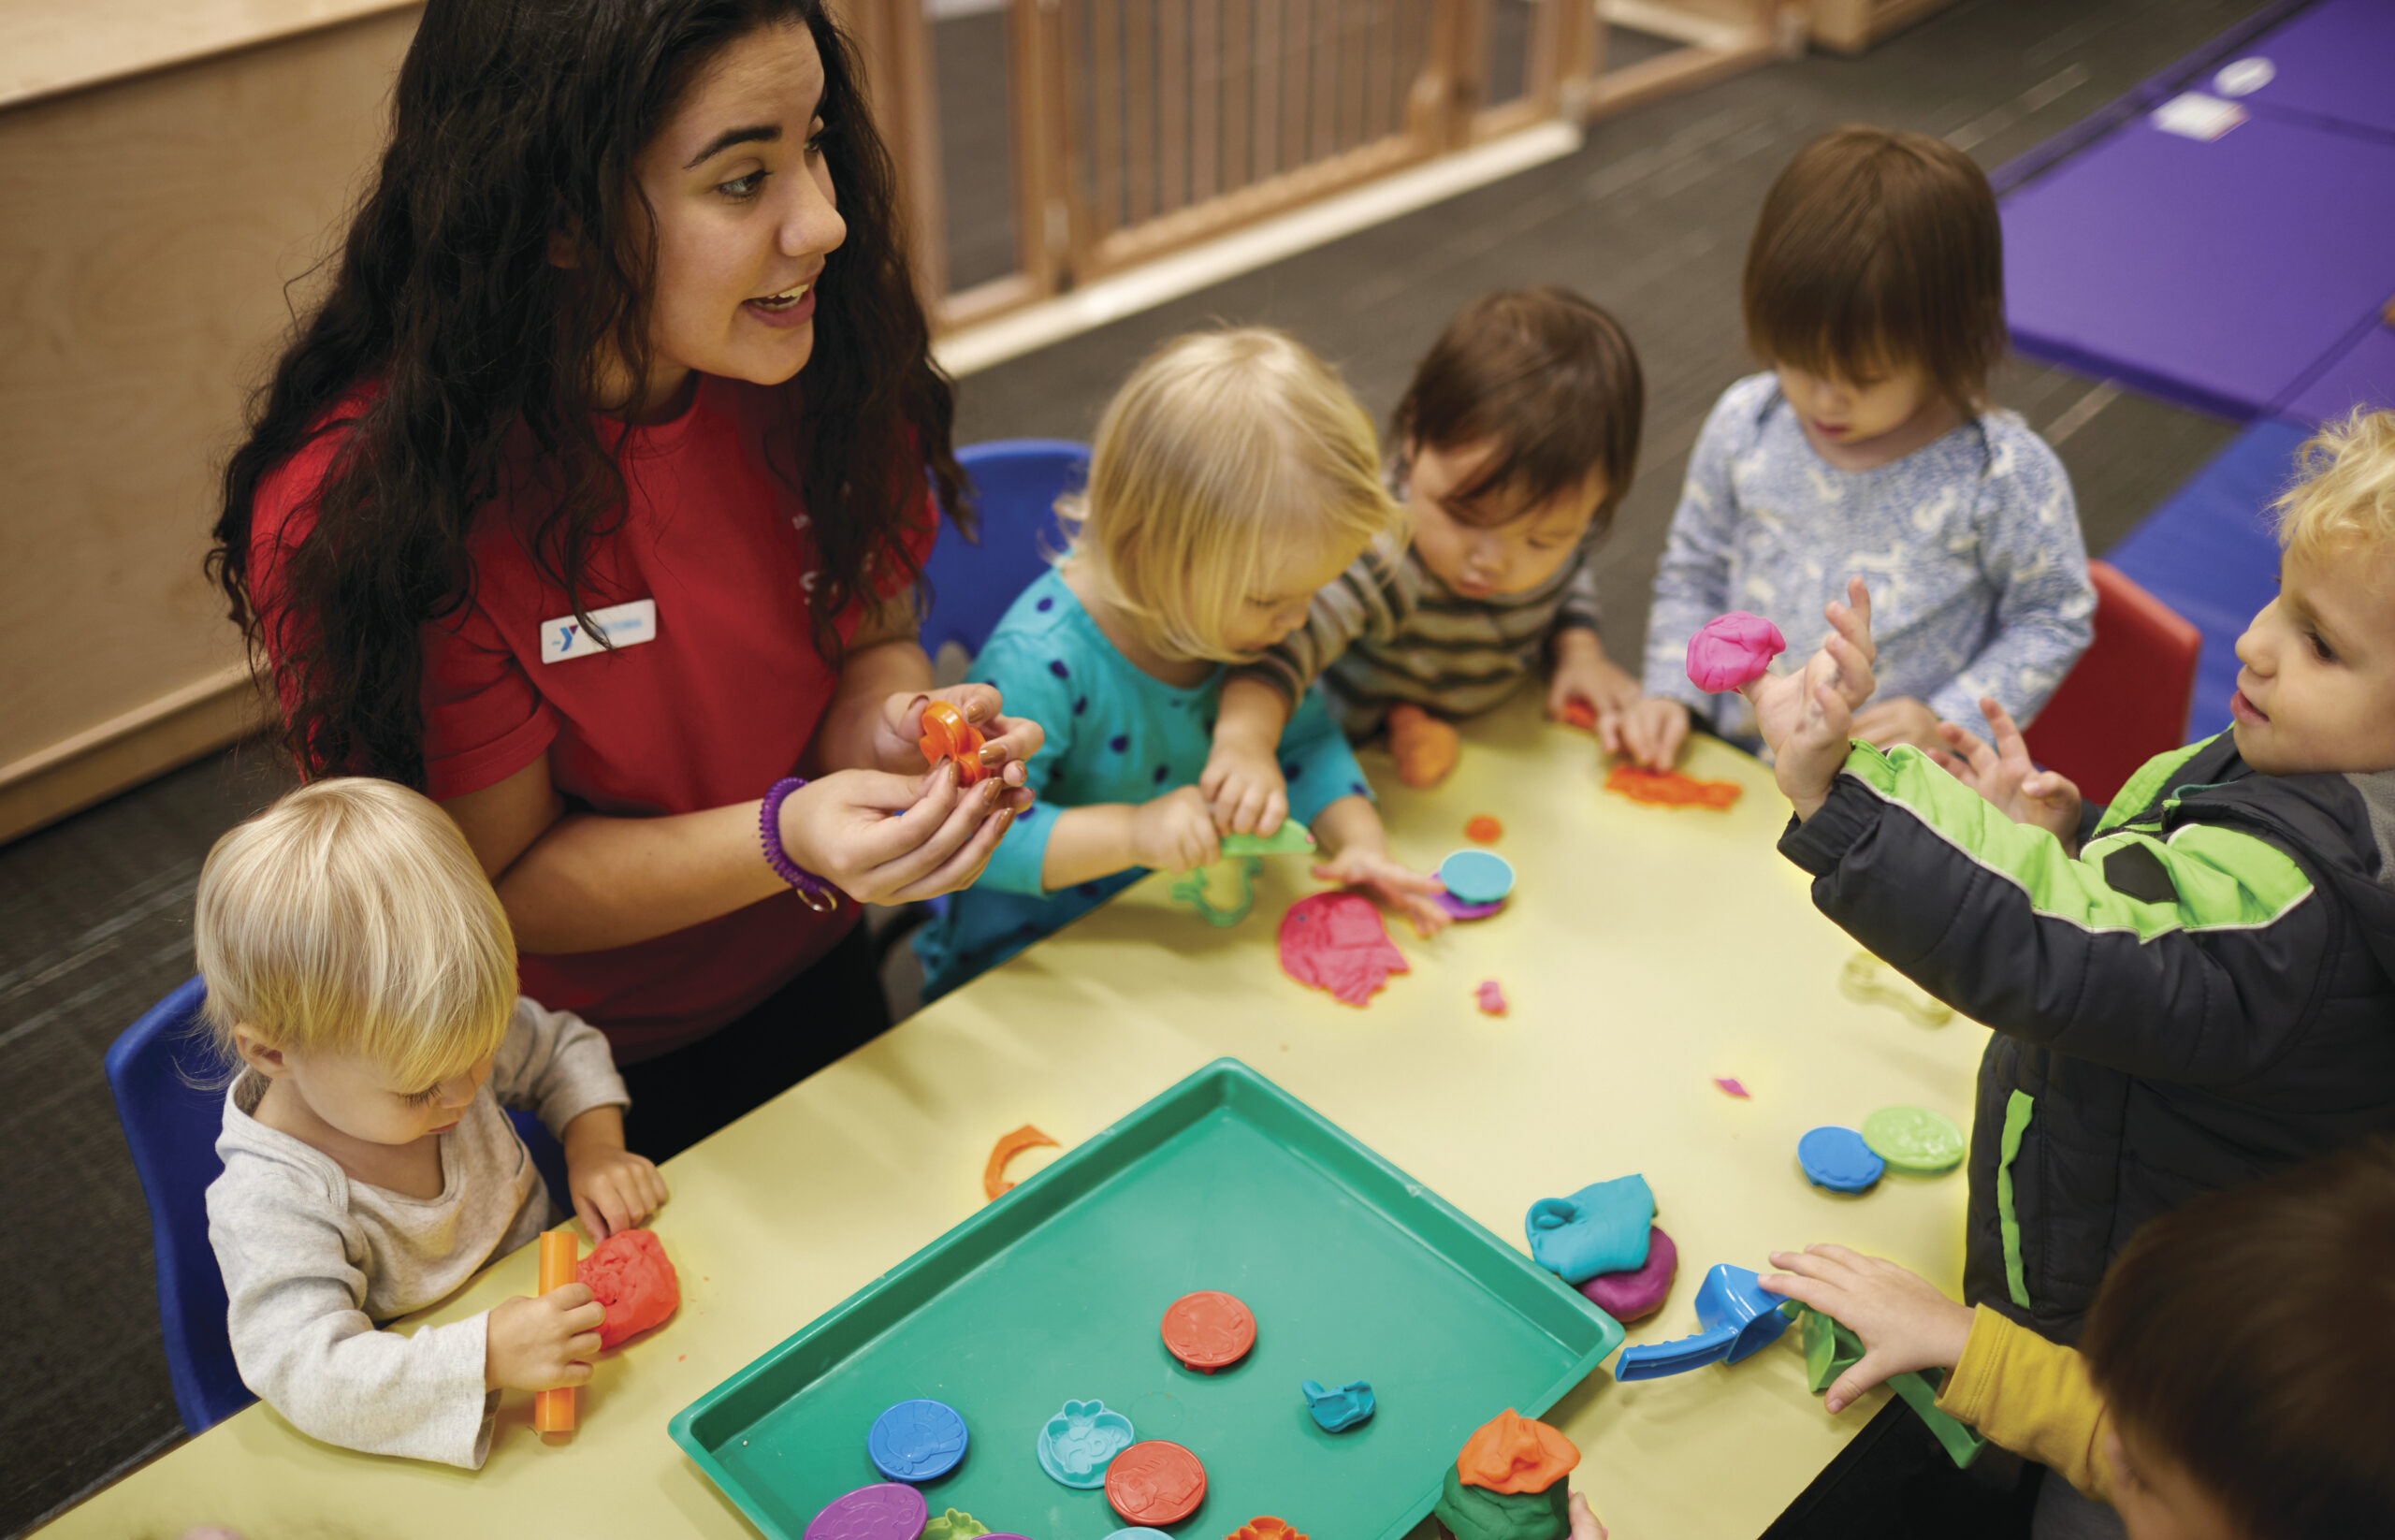 YMCA staff member help little children play with play dough.